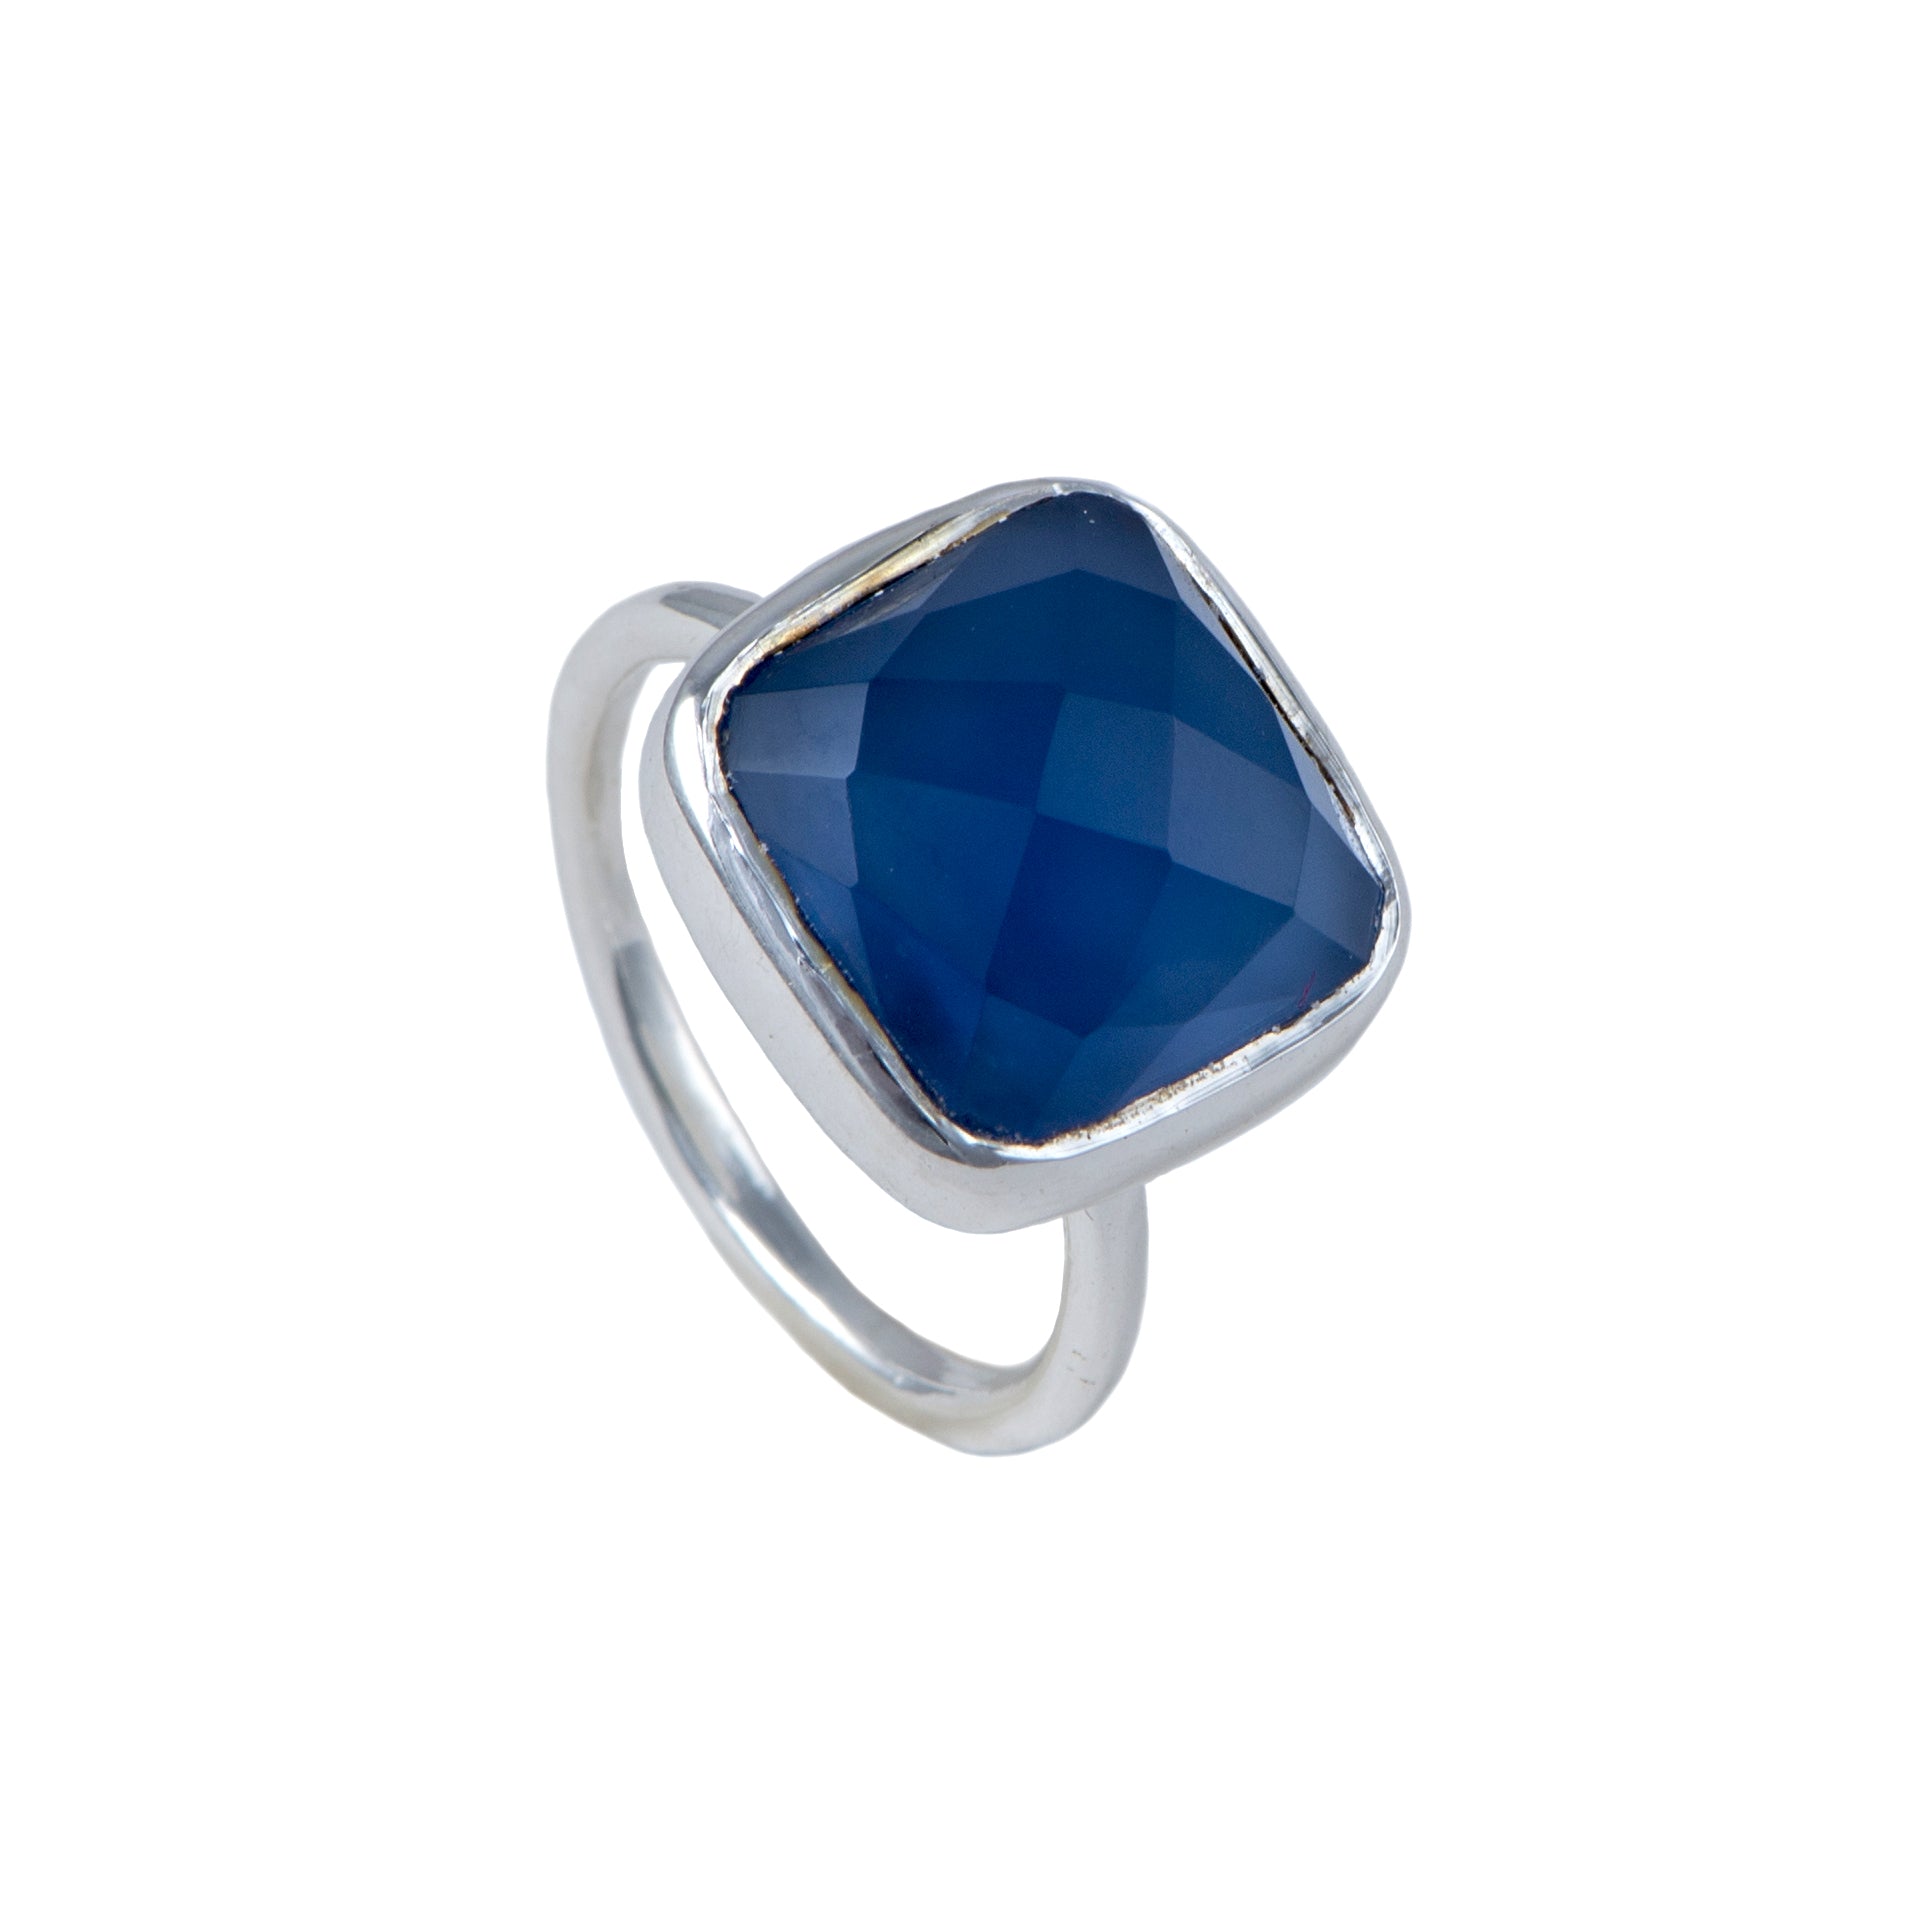 Silver Ring with Square Semiprecious Stone - Blue Chalcedony